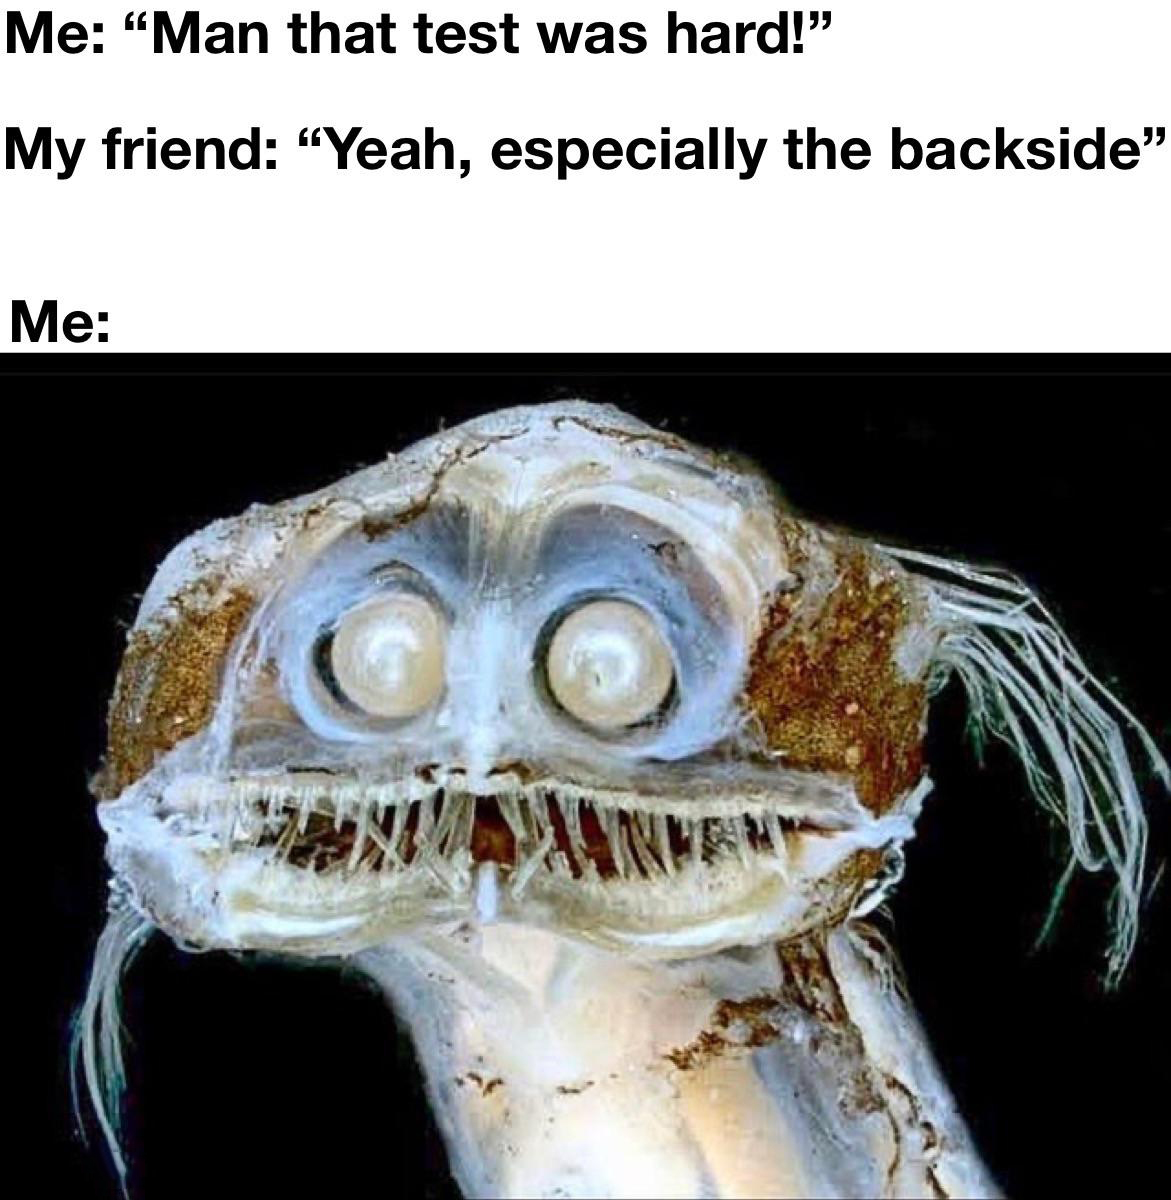 dank memes - telescope fish - Me Man that test was hard! My friend Yeah, especially the backside" Me